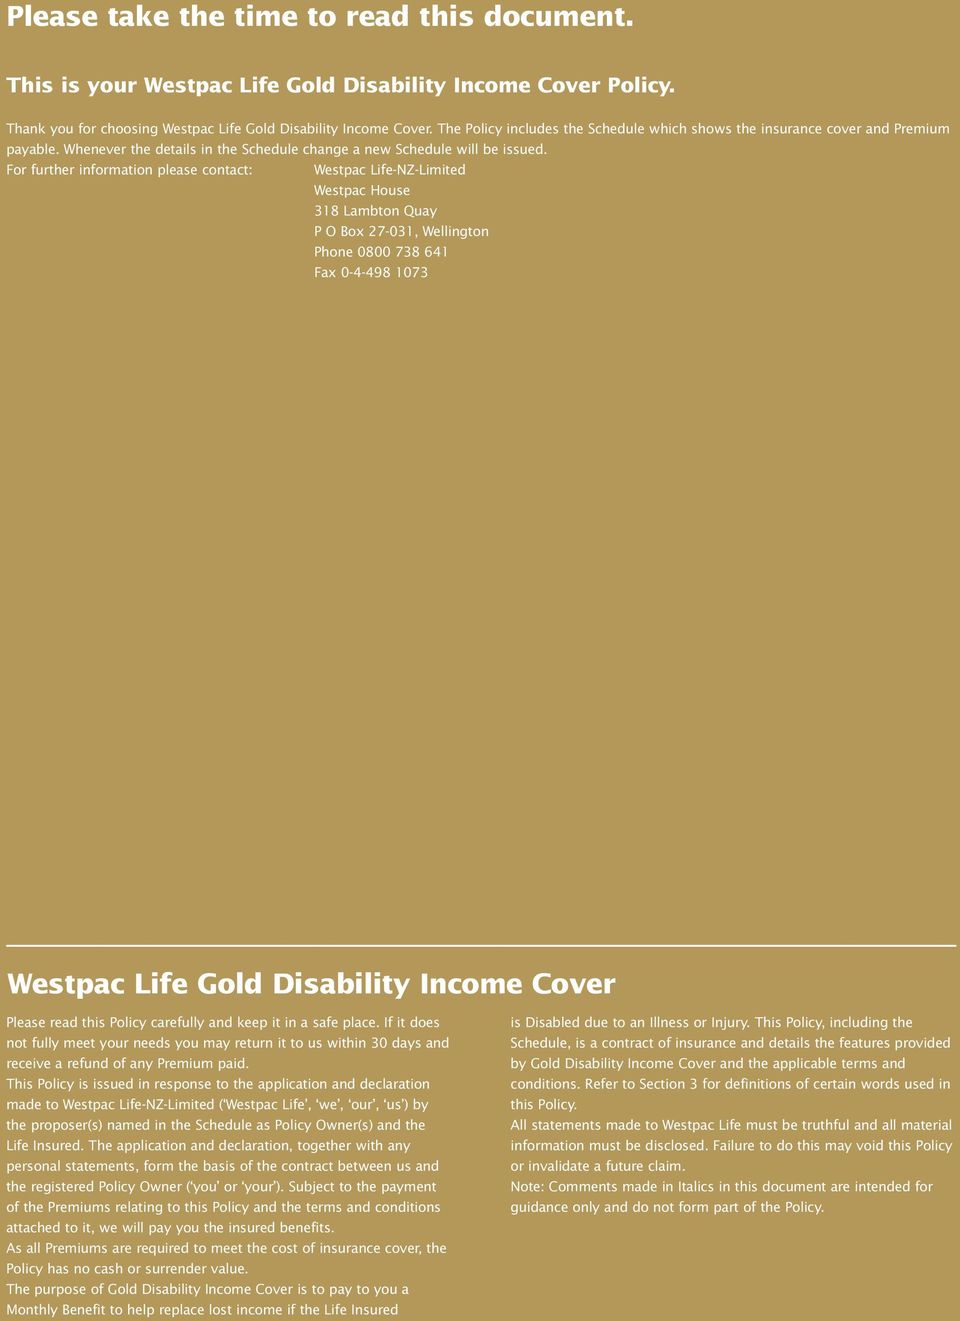 For further information please contact: Westpac Life-NZ-Limited Westpac House 318 Lambton Quay P O Box 27-031, Wellington Phone 0800 738 641 Fax 0-4-498 1073 Westpac Life Gold Disability Income Cover